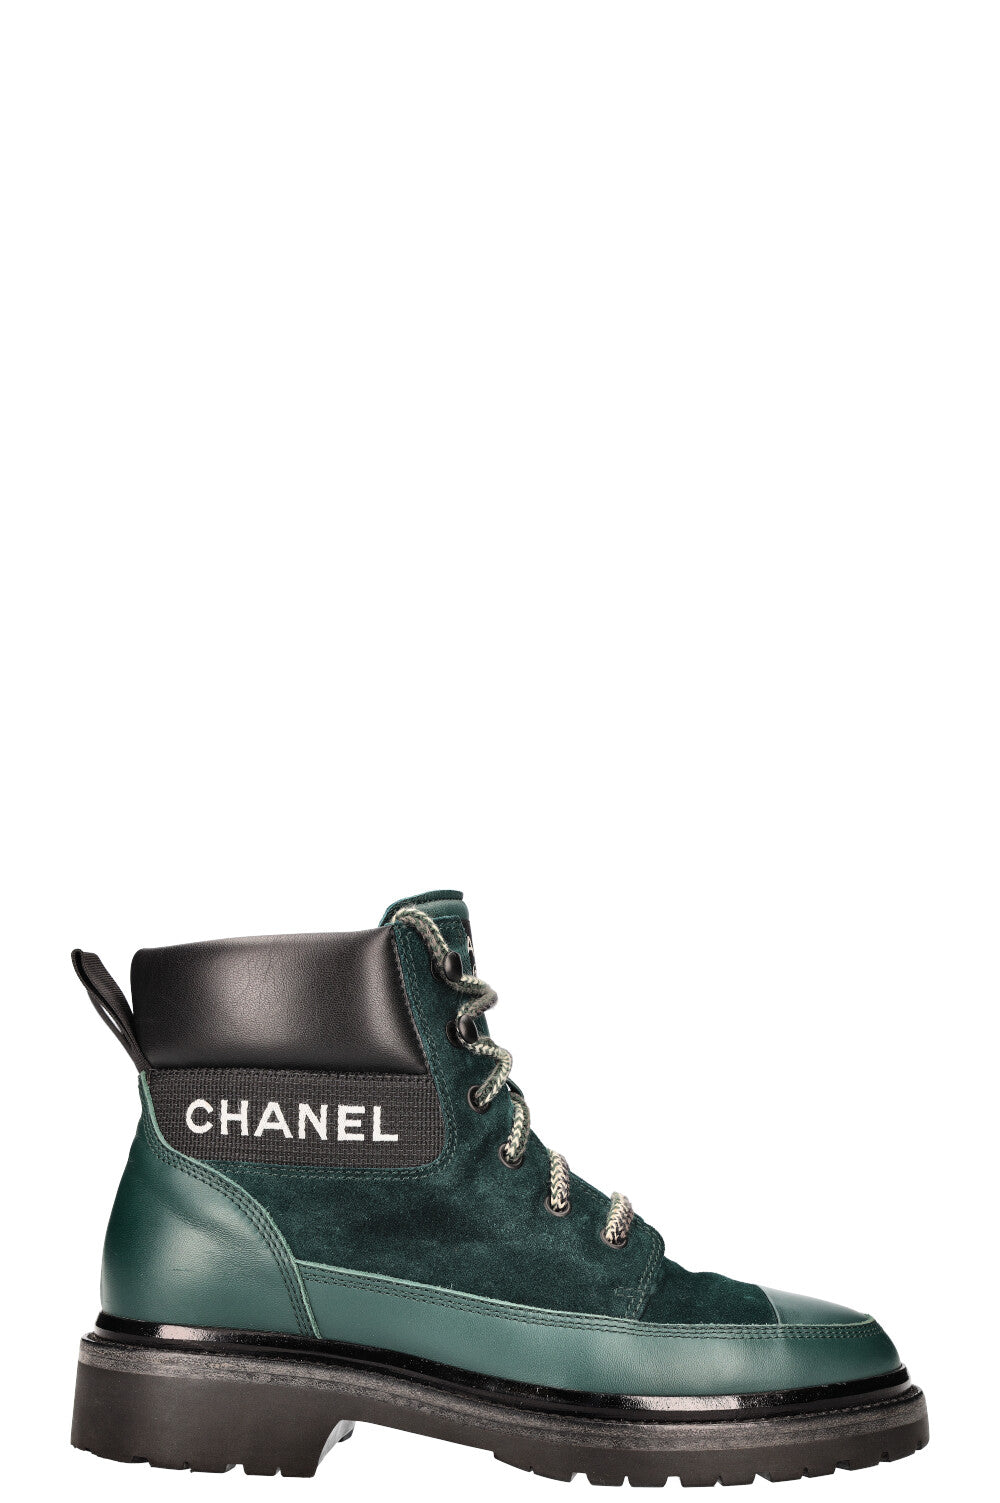 CHANEL Hiking Boots Suede Petrol